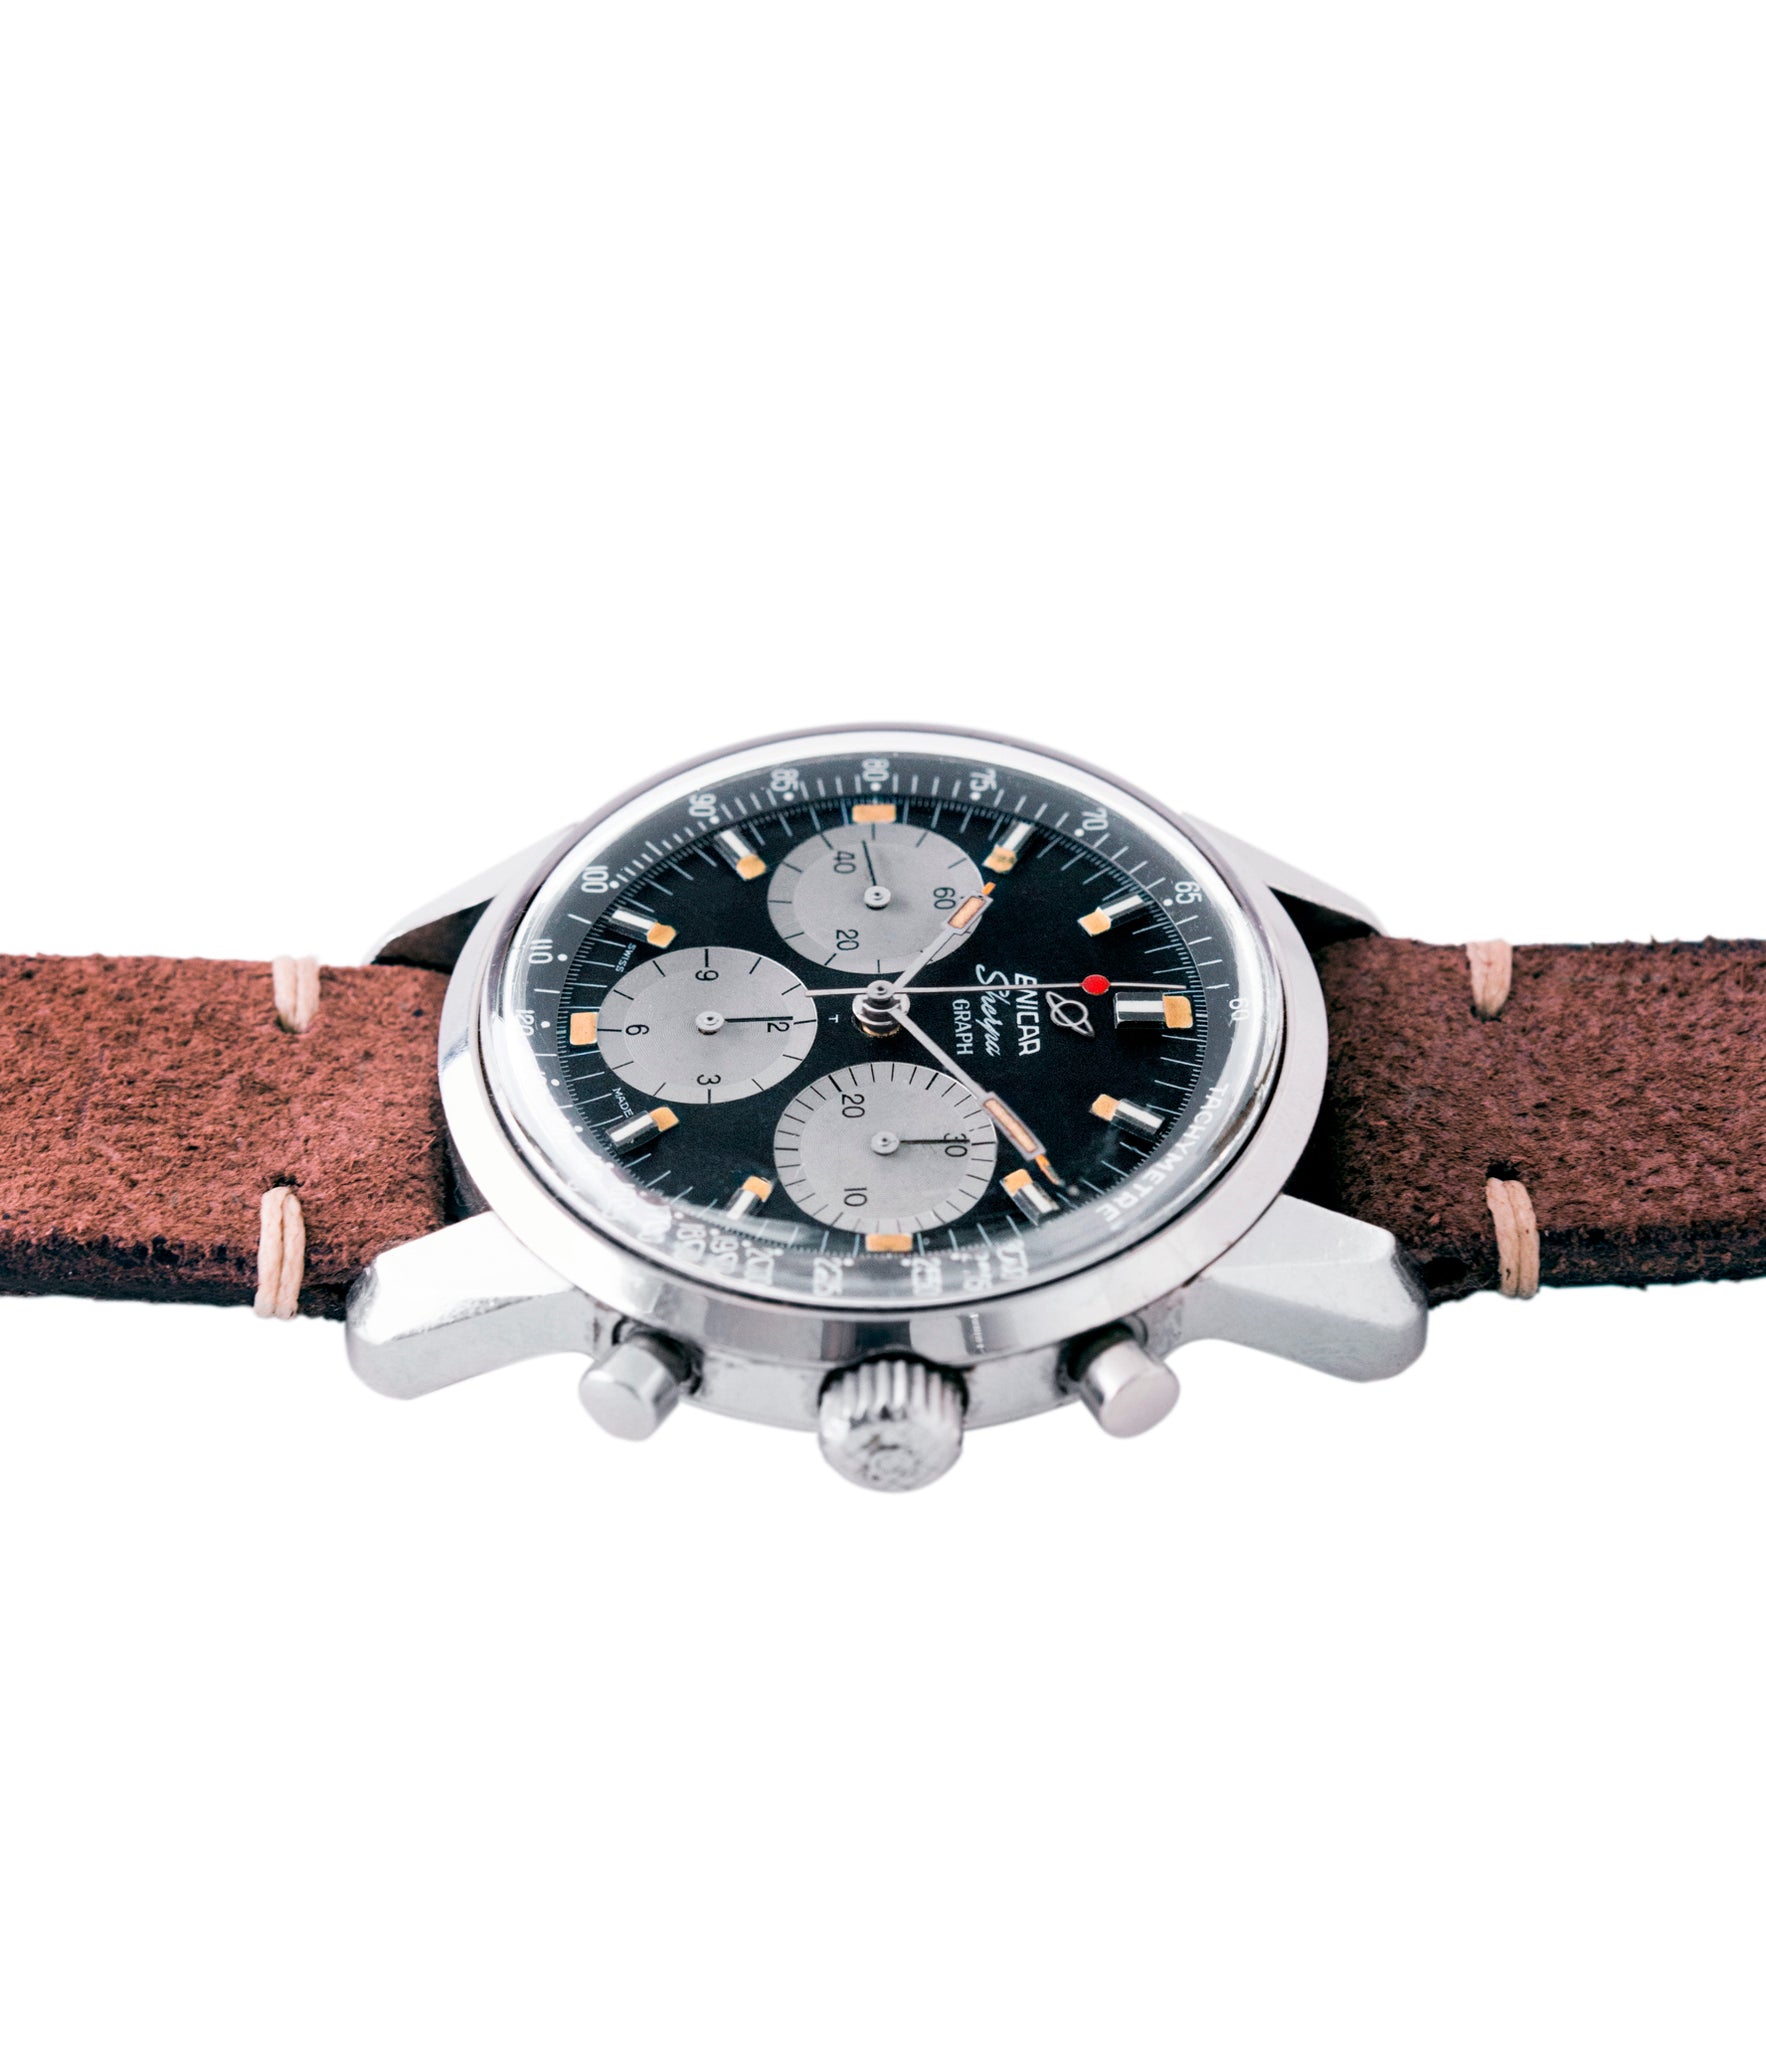 buy Enicar Sherpa Graph 300 MKIII Jim Clark steel vintage chronograph watch at A Collected Man London UK specialist of rare watches